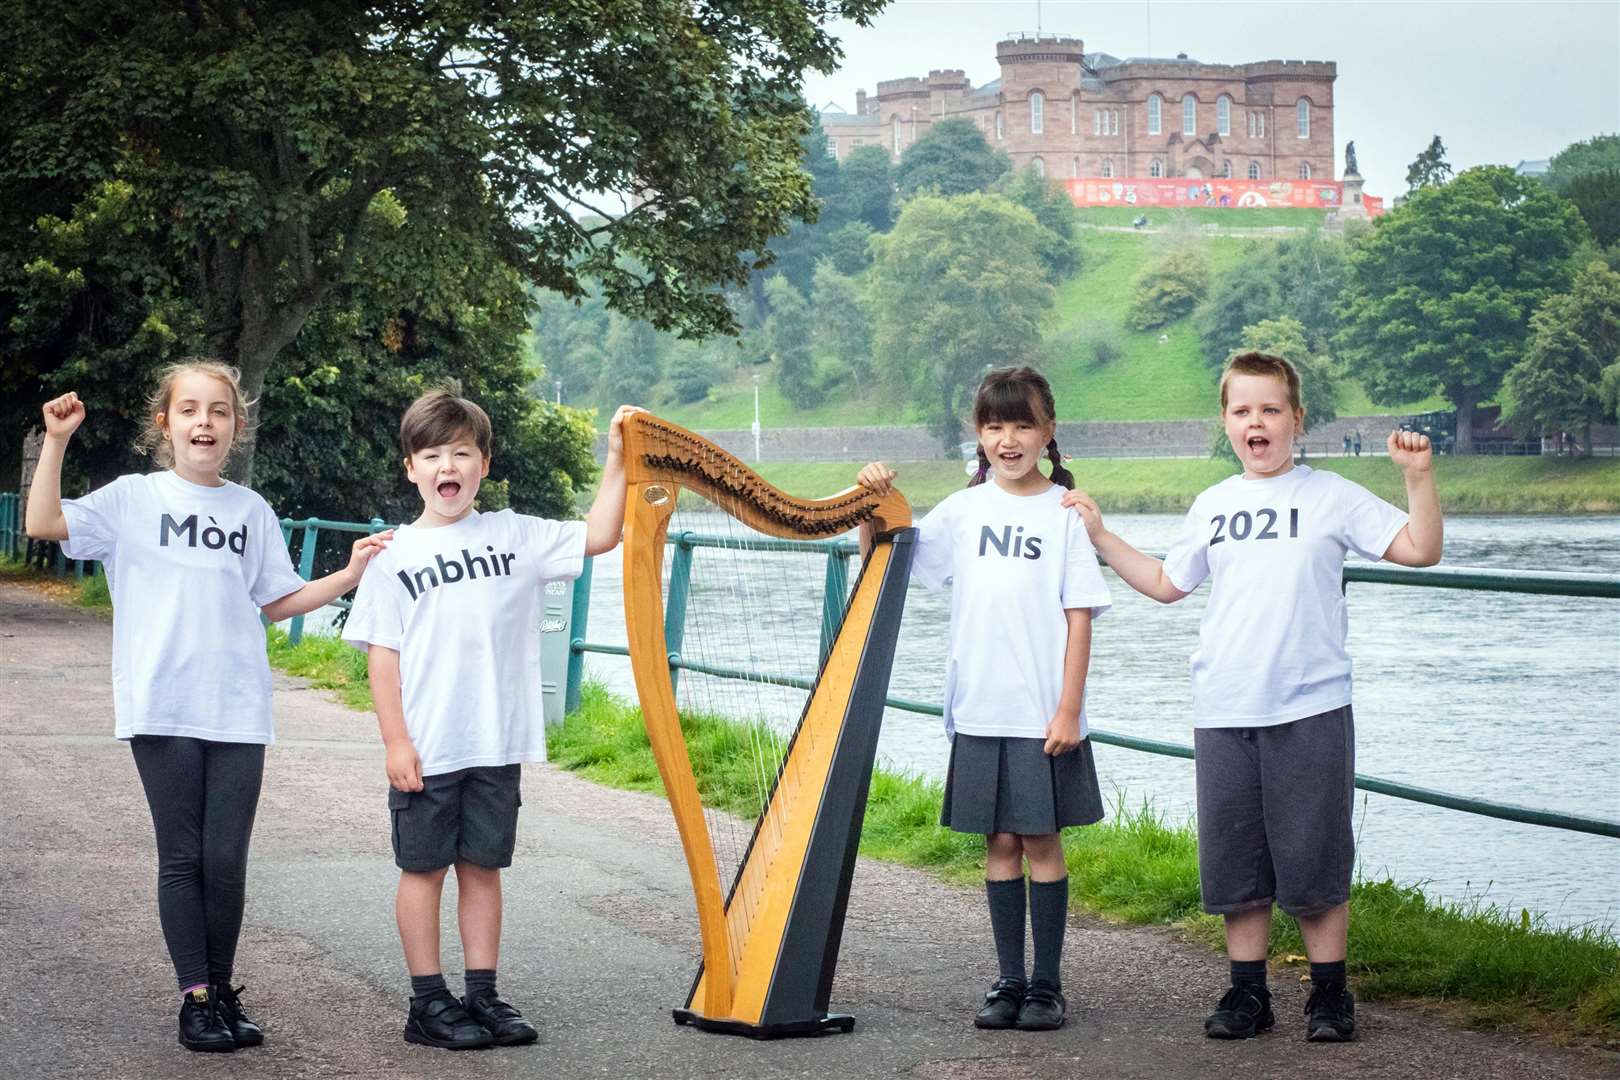 Children from Inverness Gaelic School, from left, Ava Williams (9), Ruaraidh MacLeod (6), Isobel Simpson (8) and Hunter Williams (8) celebrating the launch of Mòd 2021 on the banks of the River Ness.